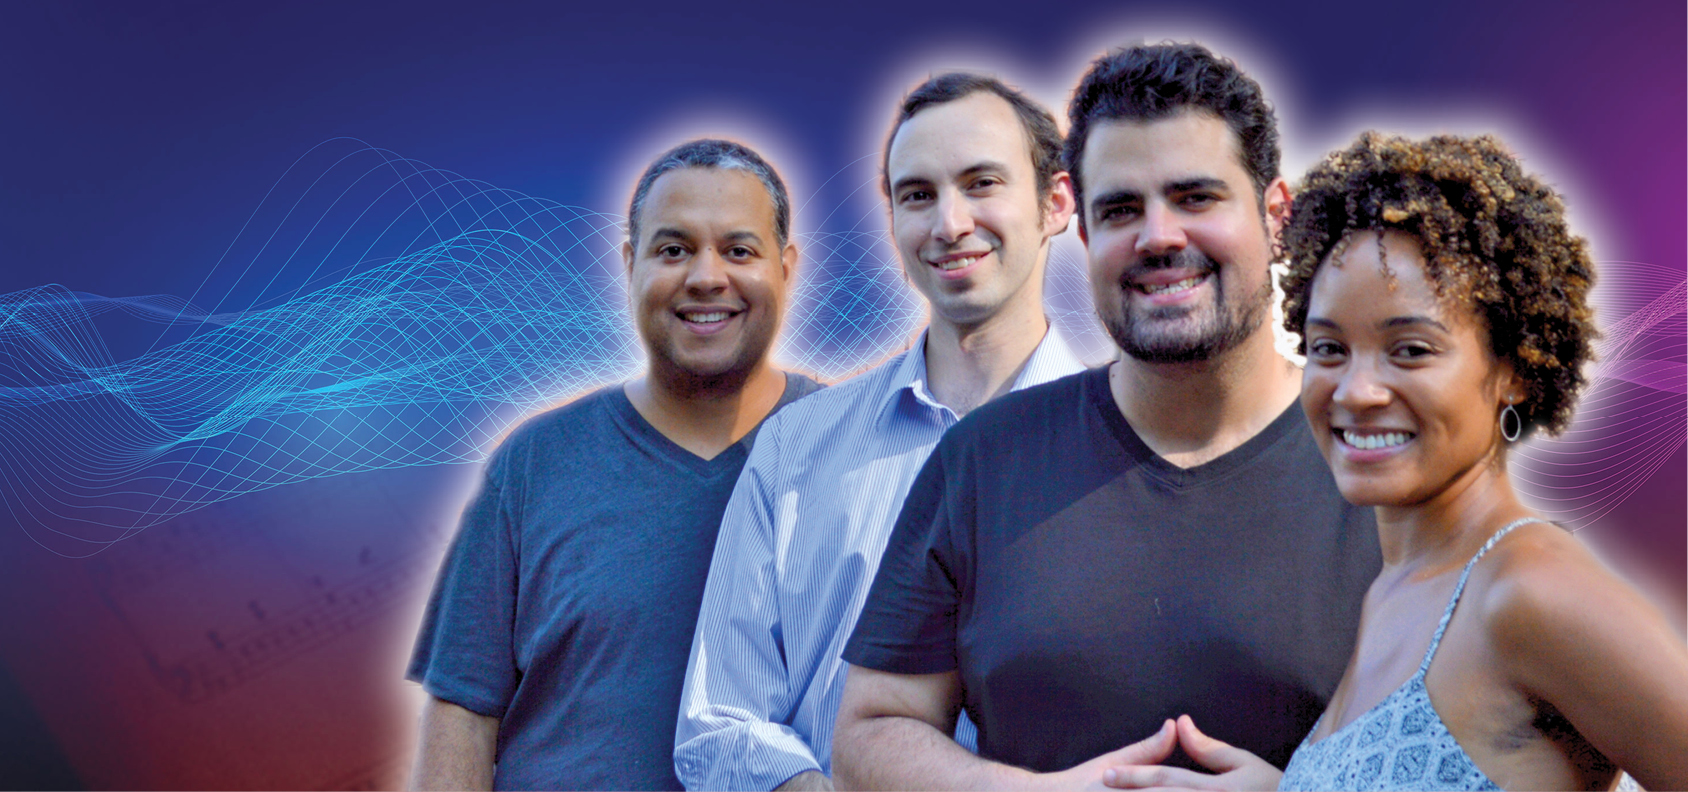 The members of Harlem Quartet pose in casual clothing against an abstract background.